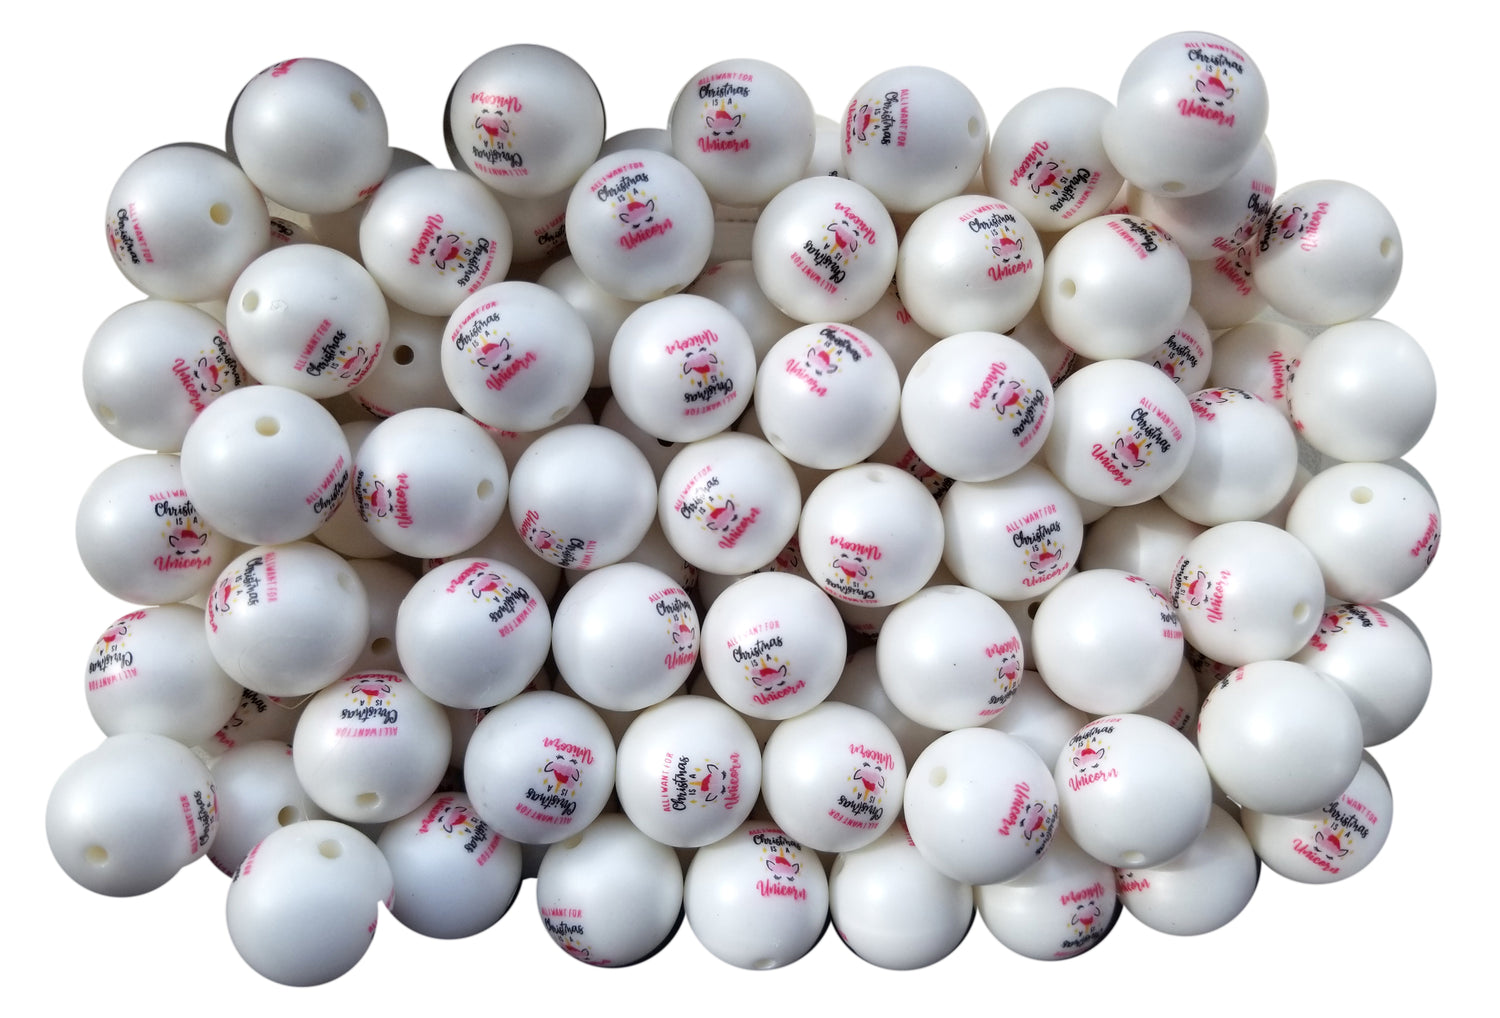 all I want for christmas is a unicorn 20mm printed bubblegum beads